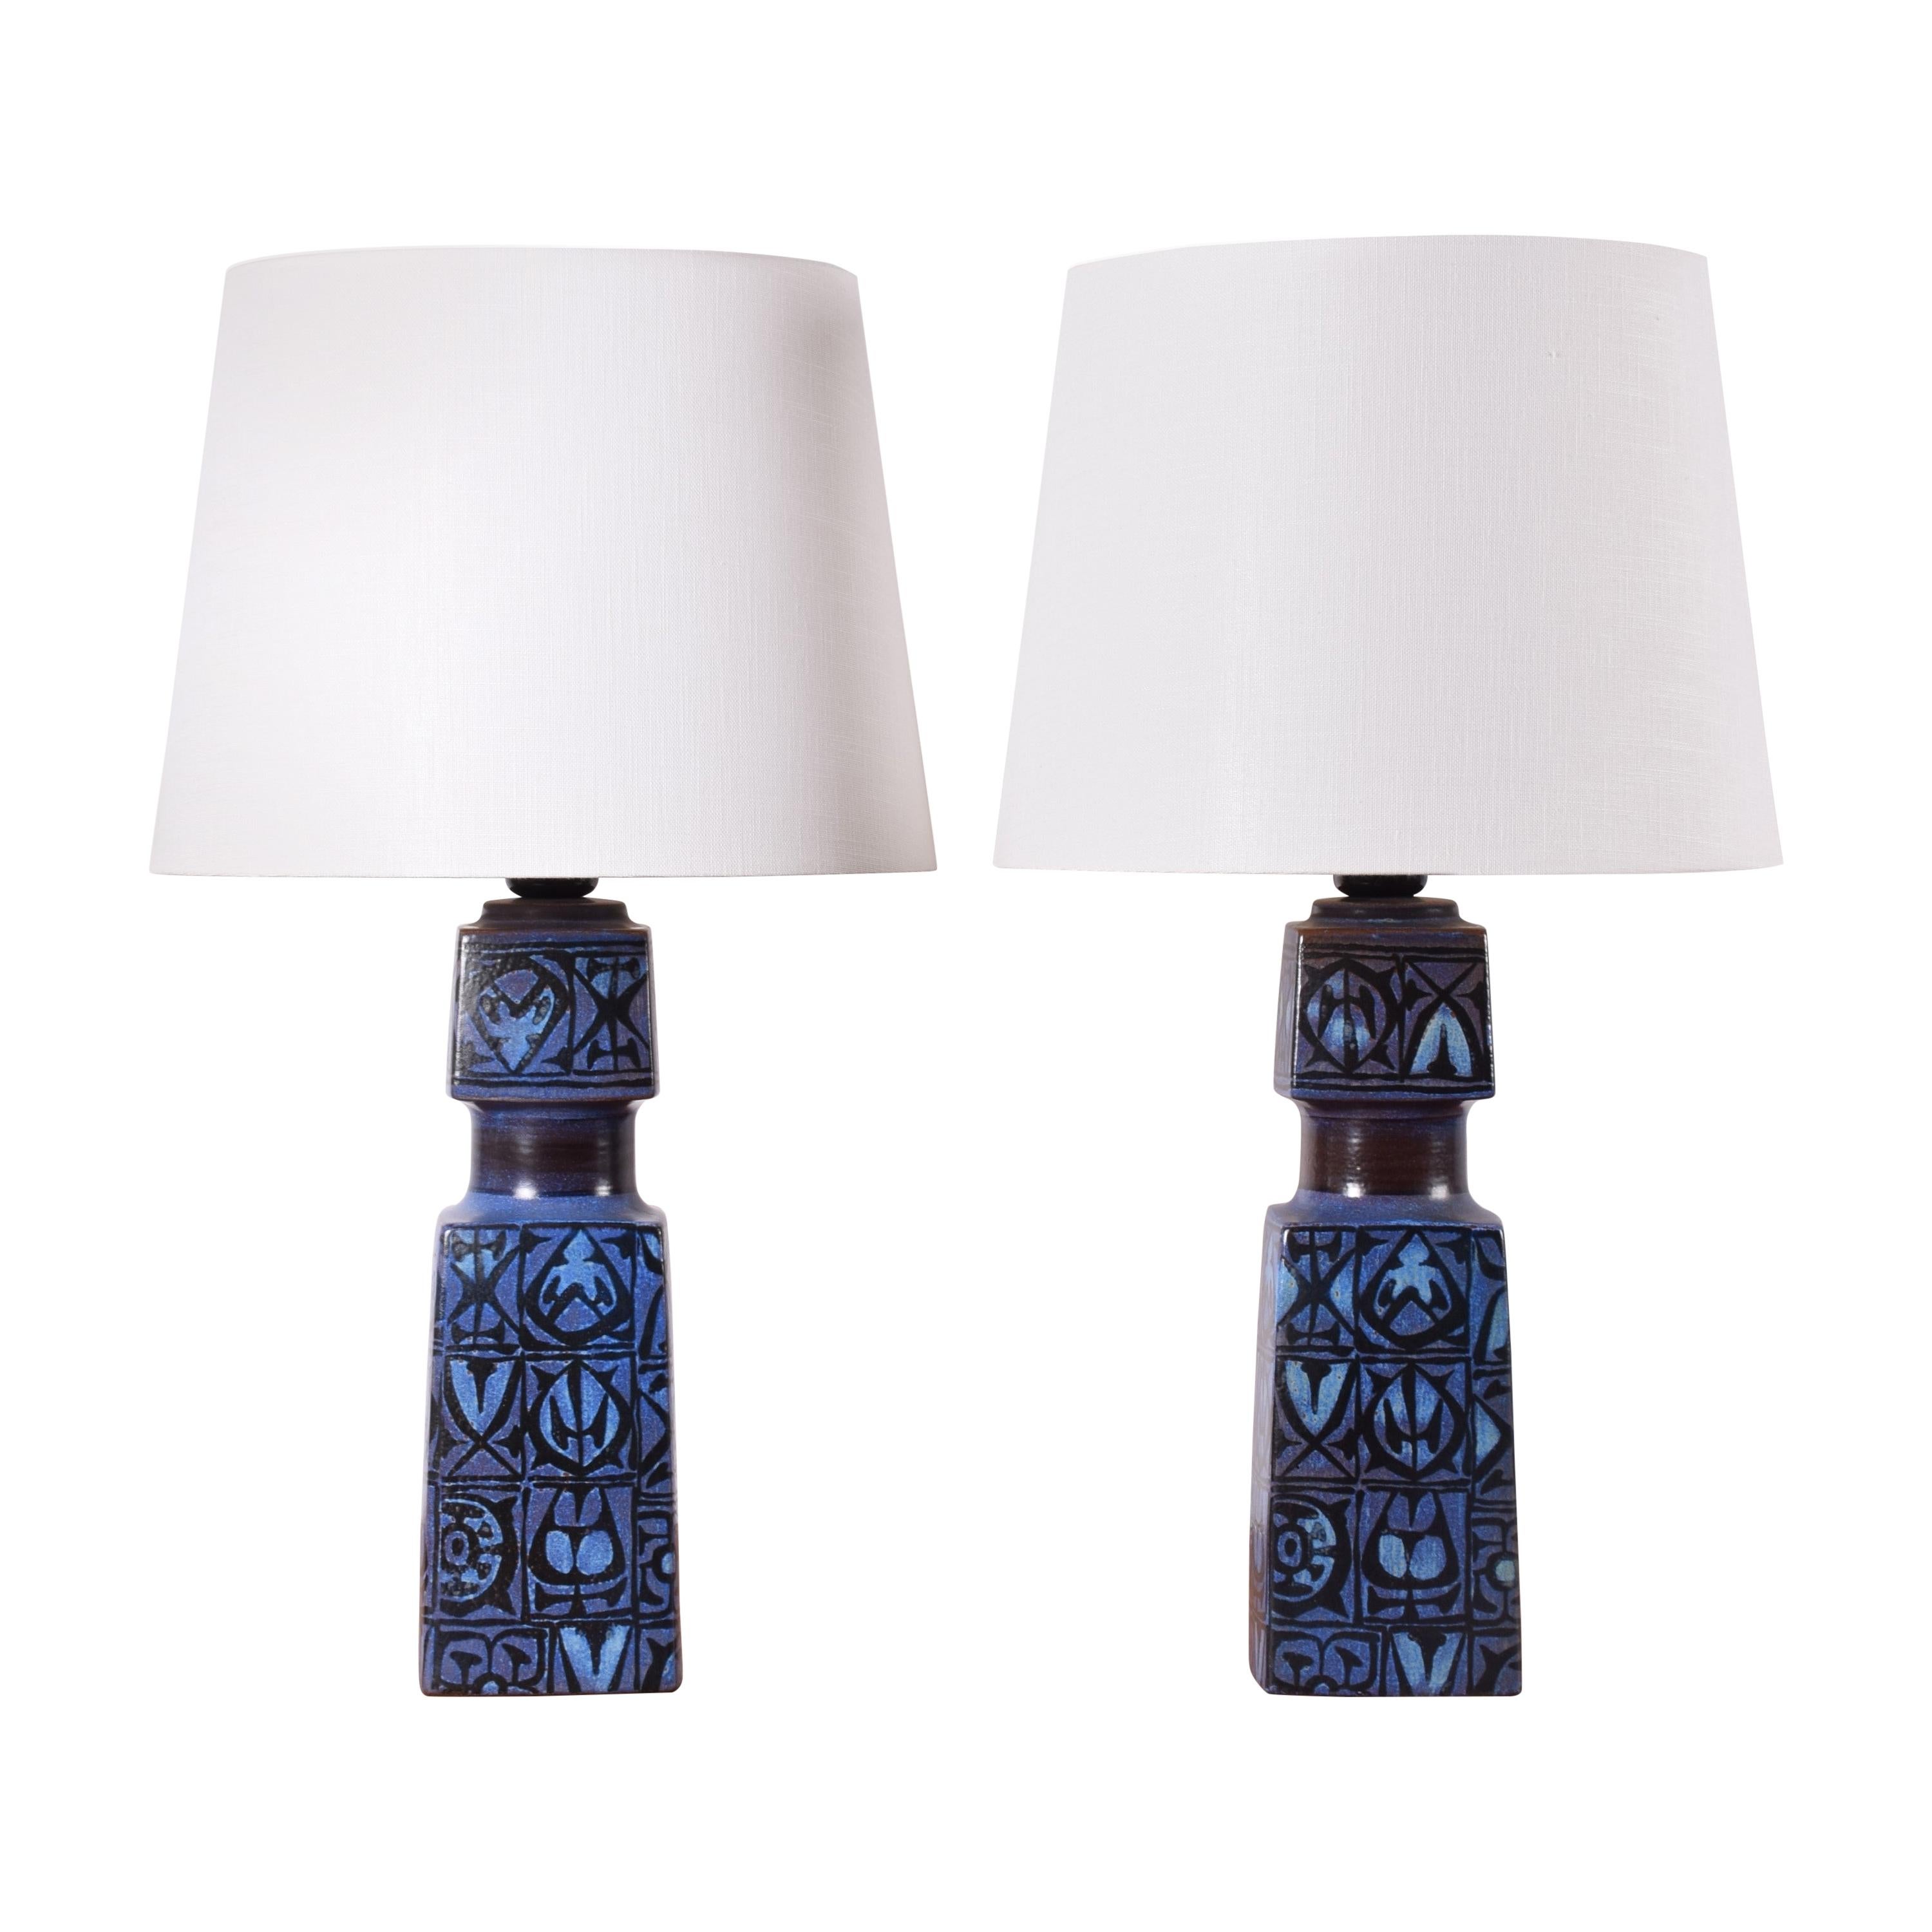 Pair of Danish Royal Copenhagen Baca Blue Table Lamps by Nils Thorsson, 1970s